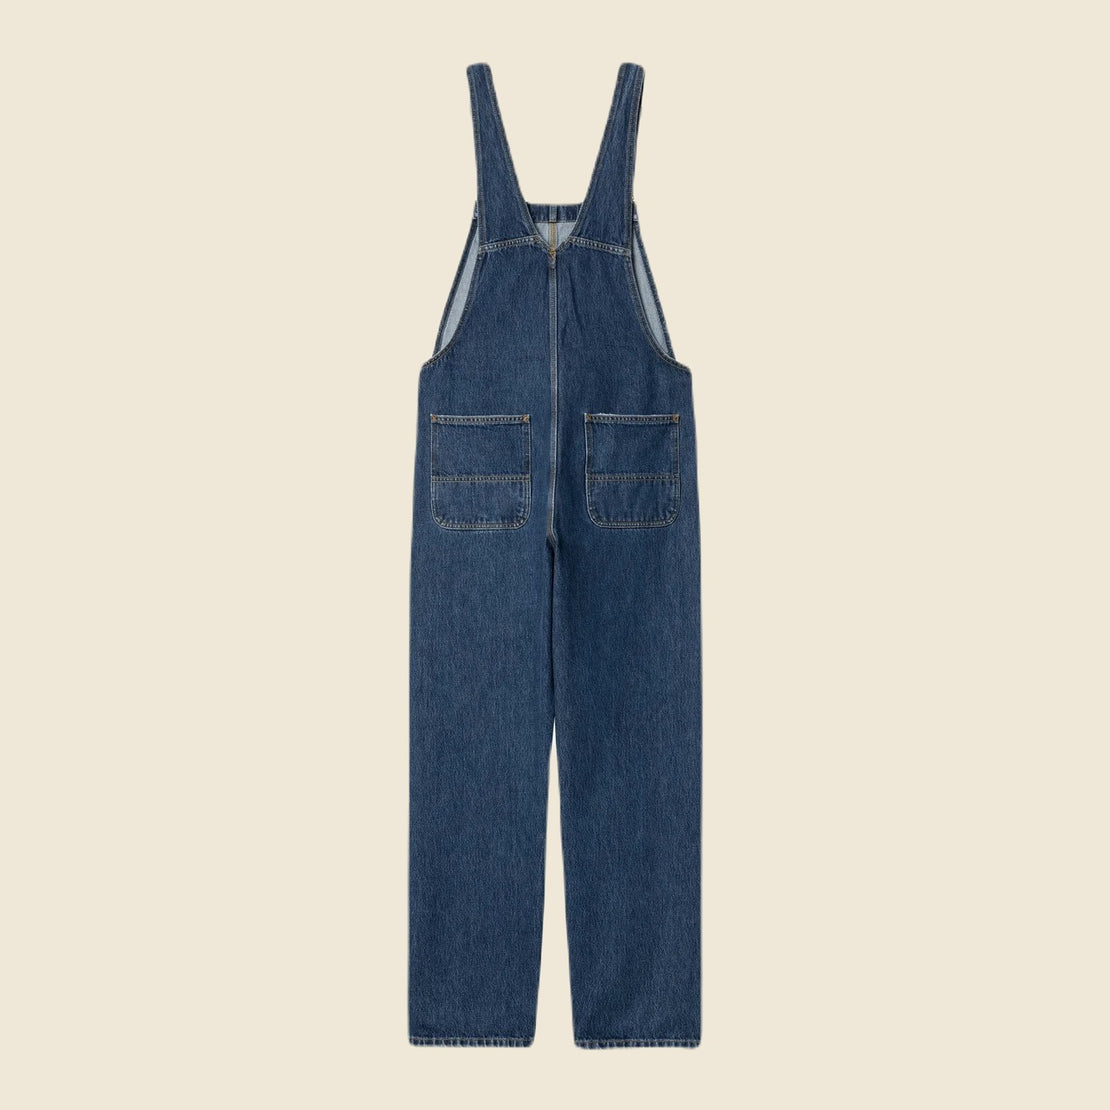 Nash Overall Straight - Blue Stone Washed - Carhartt WIP - STAG Provisions - W - Onepiece - Overalls